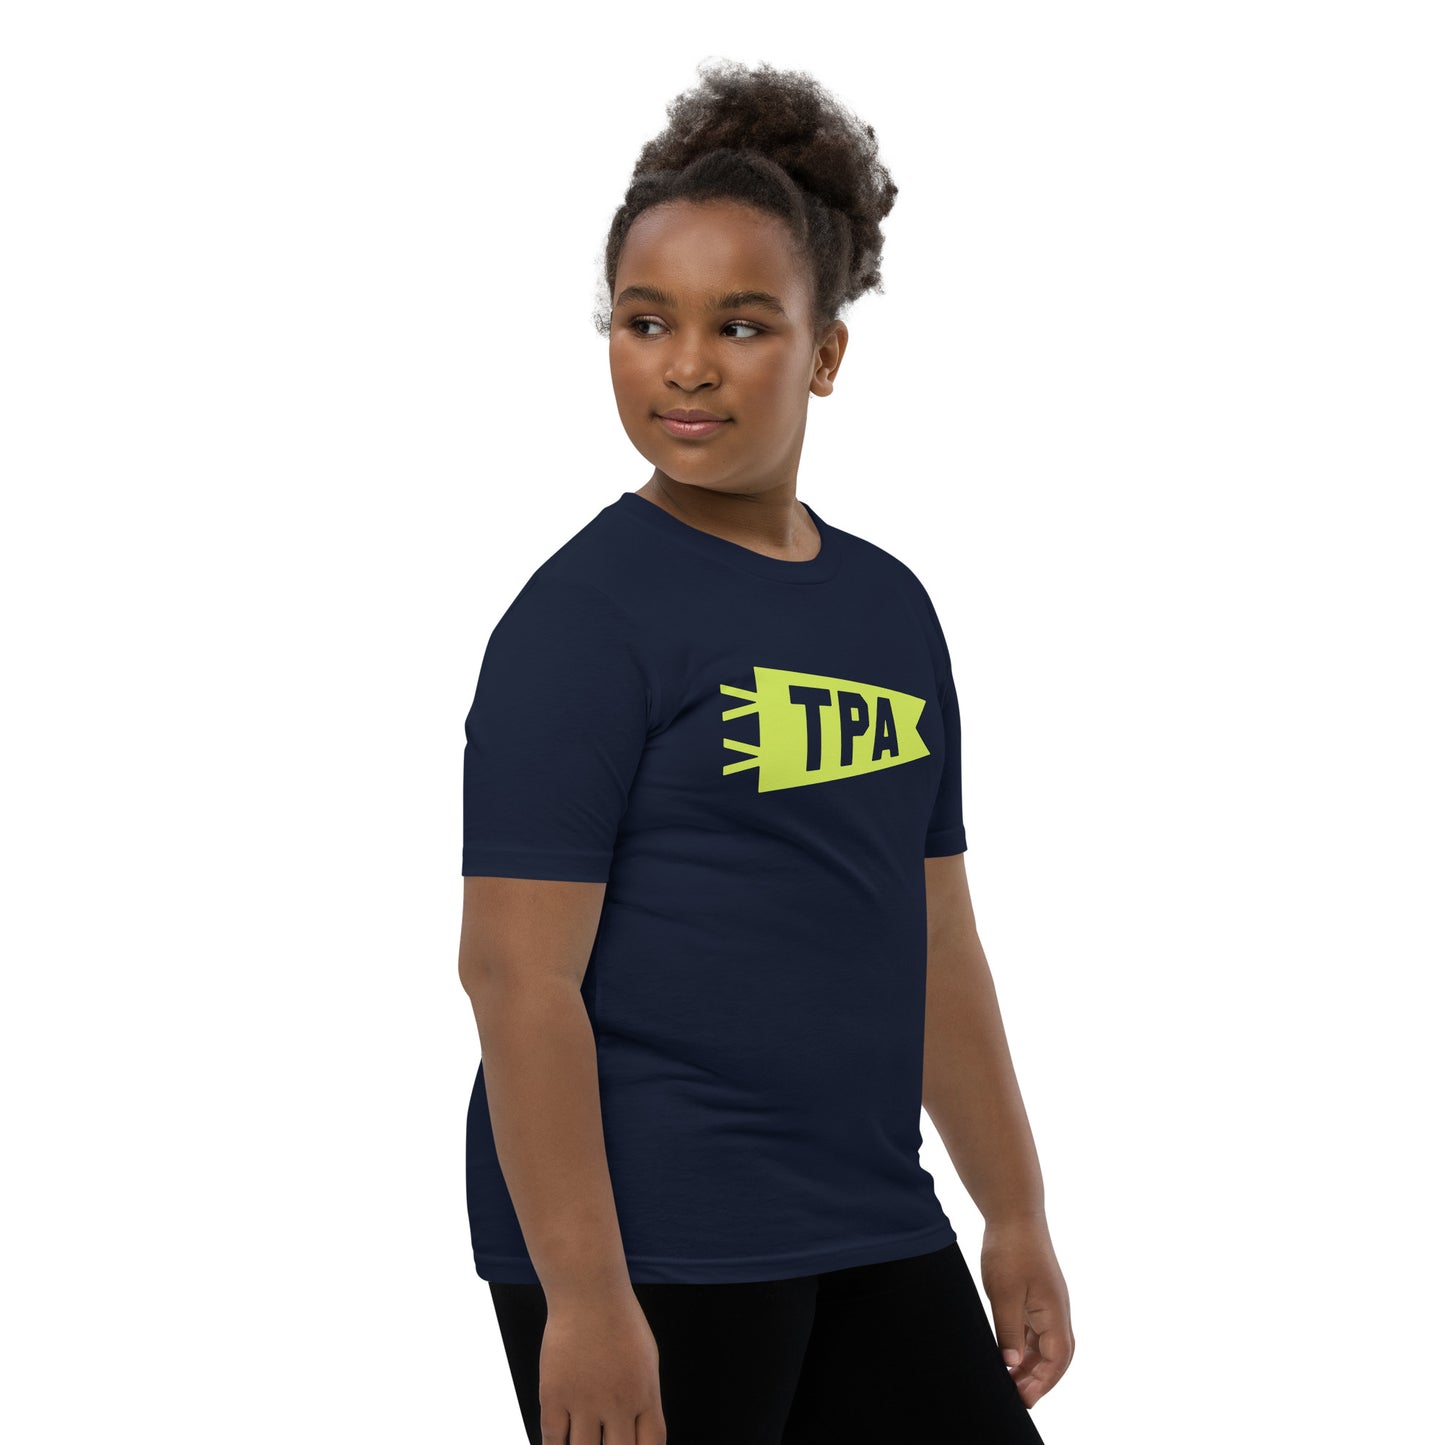 Kid's Airport Code Tee - Green Graphic • TPA Tampa • YHM Designs - Image 03